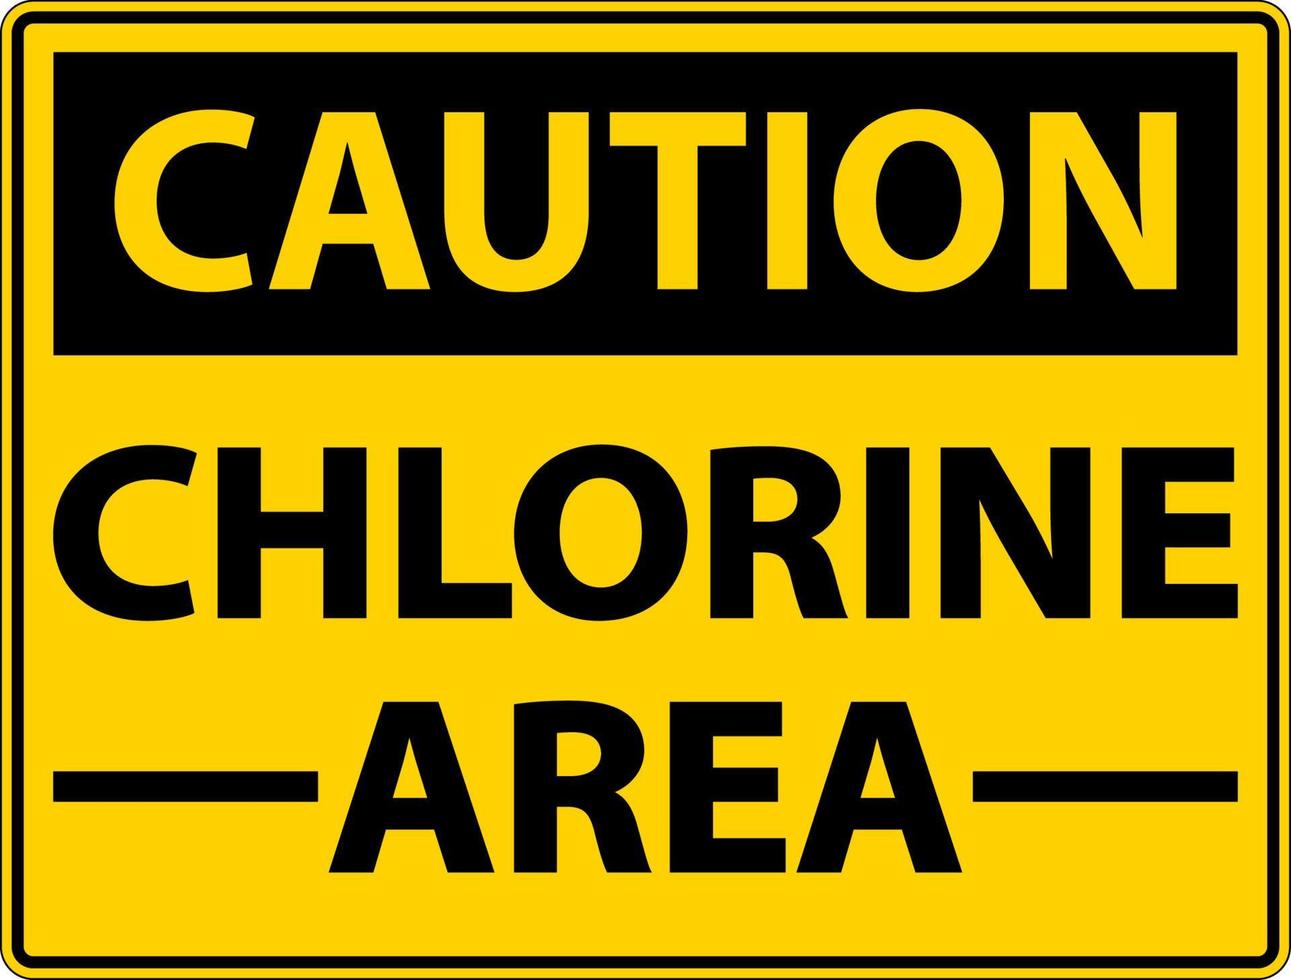 Caution Chlorine Area Sign On White Background vector